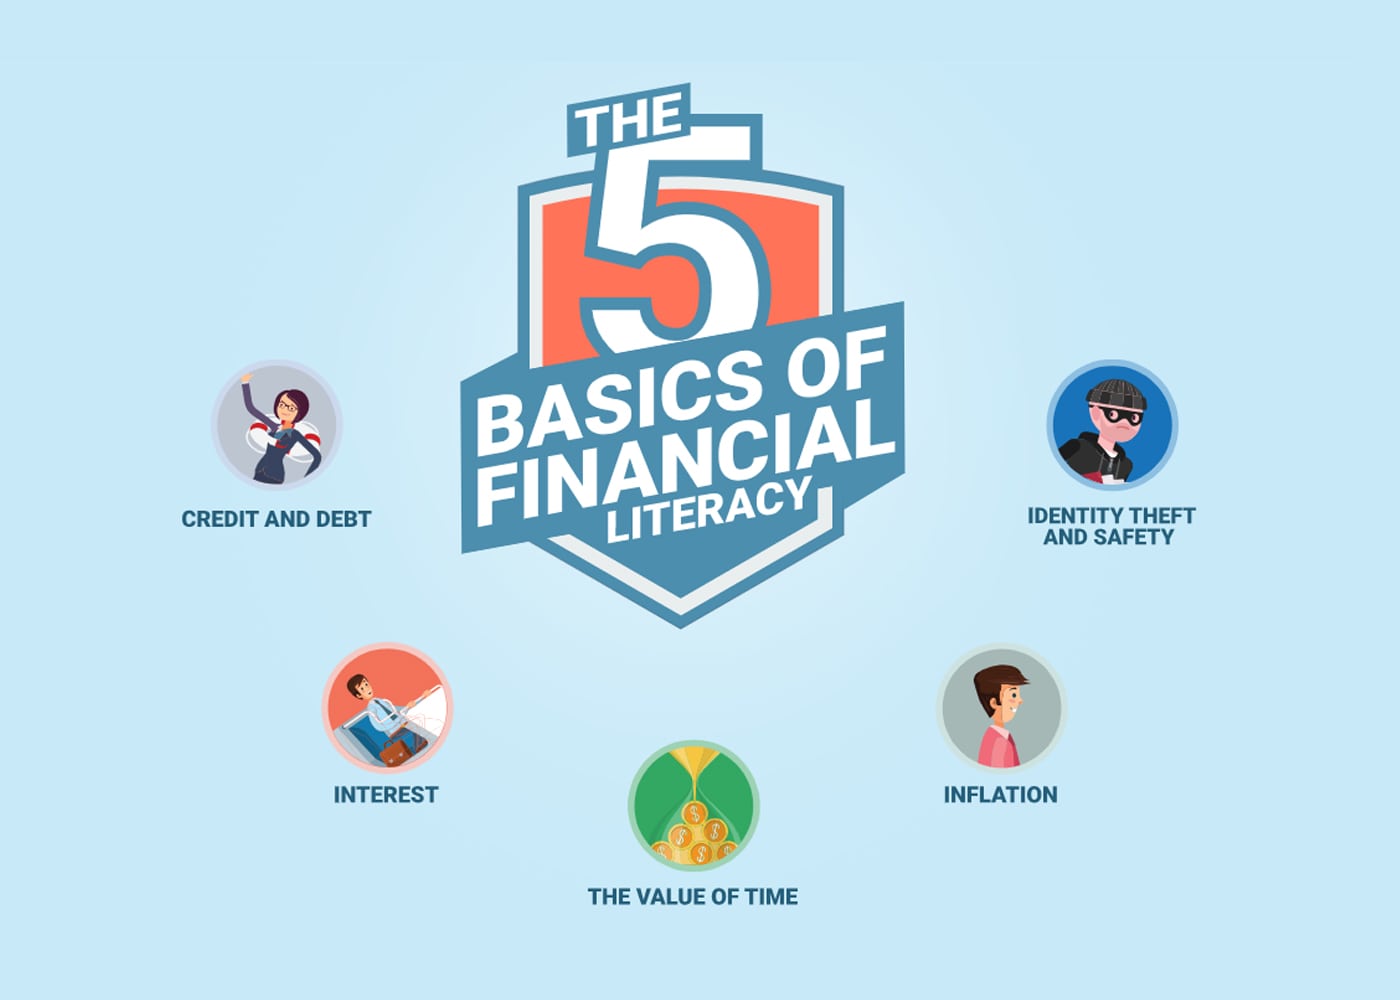 The Five Basics of Financial Literacy - Money Managers, Inc.